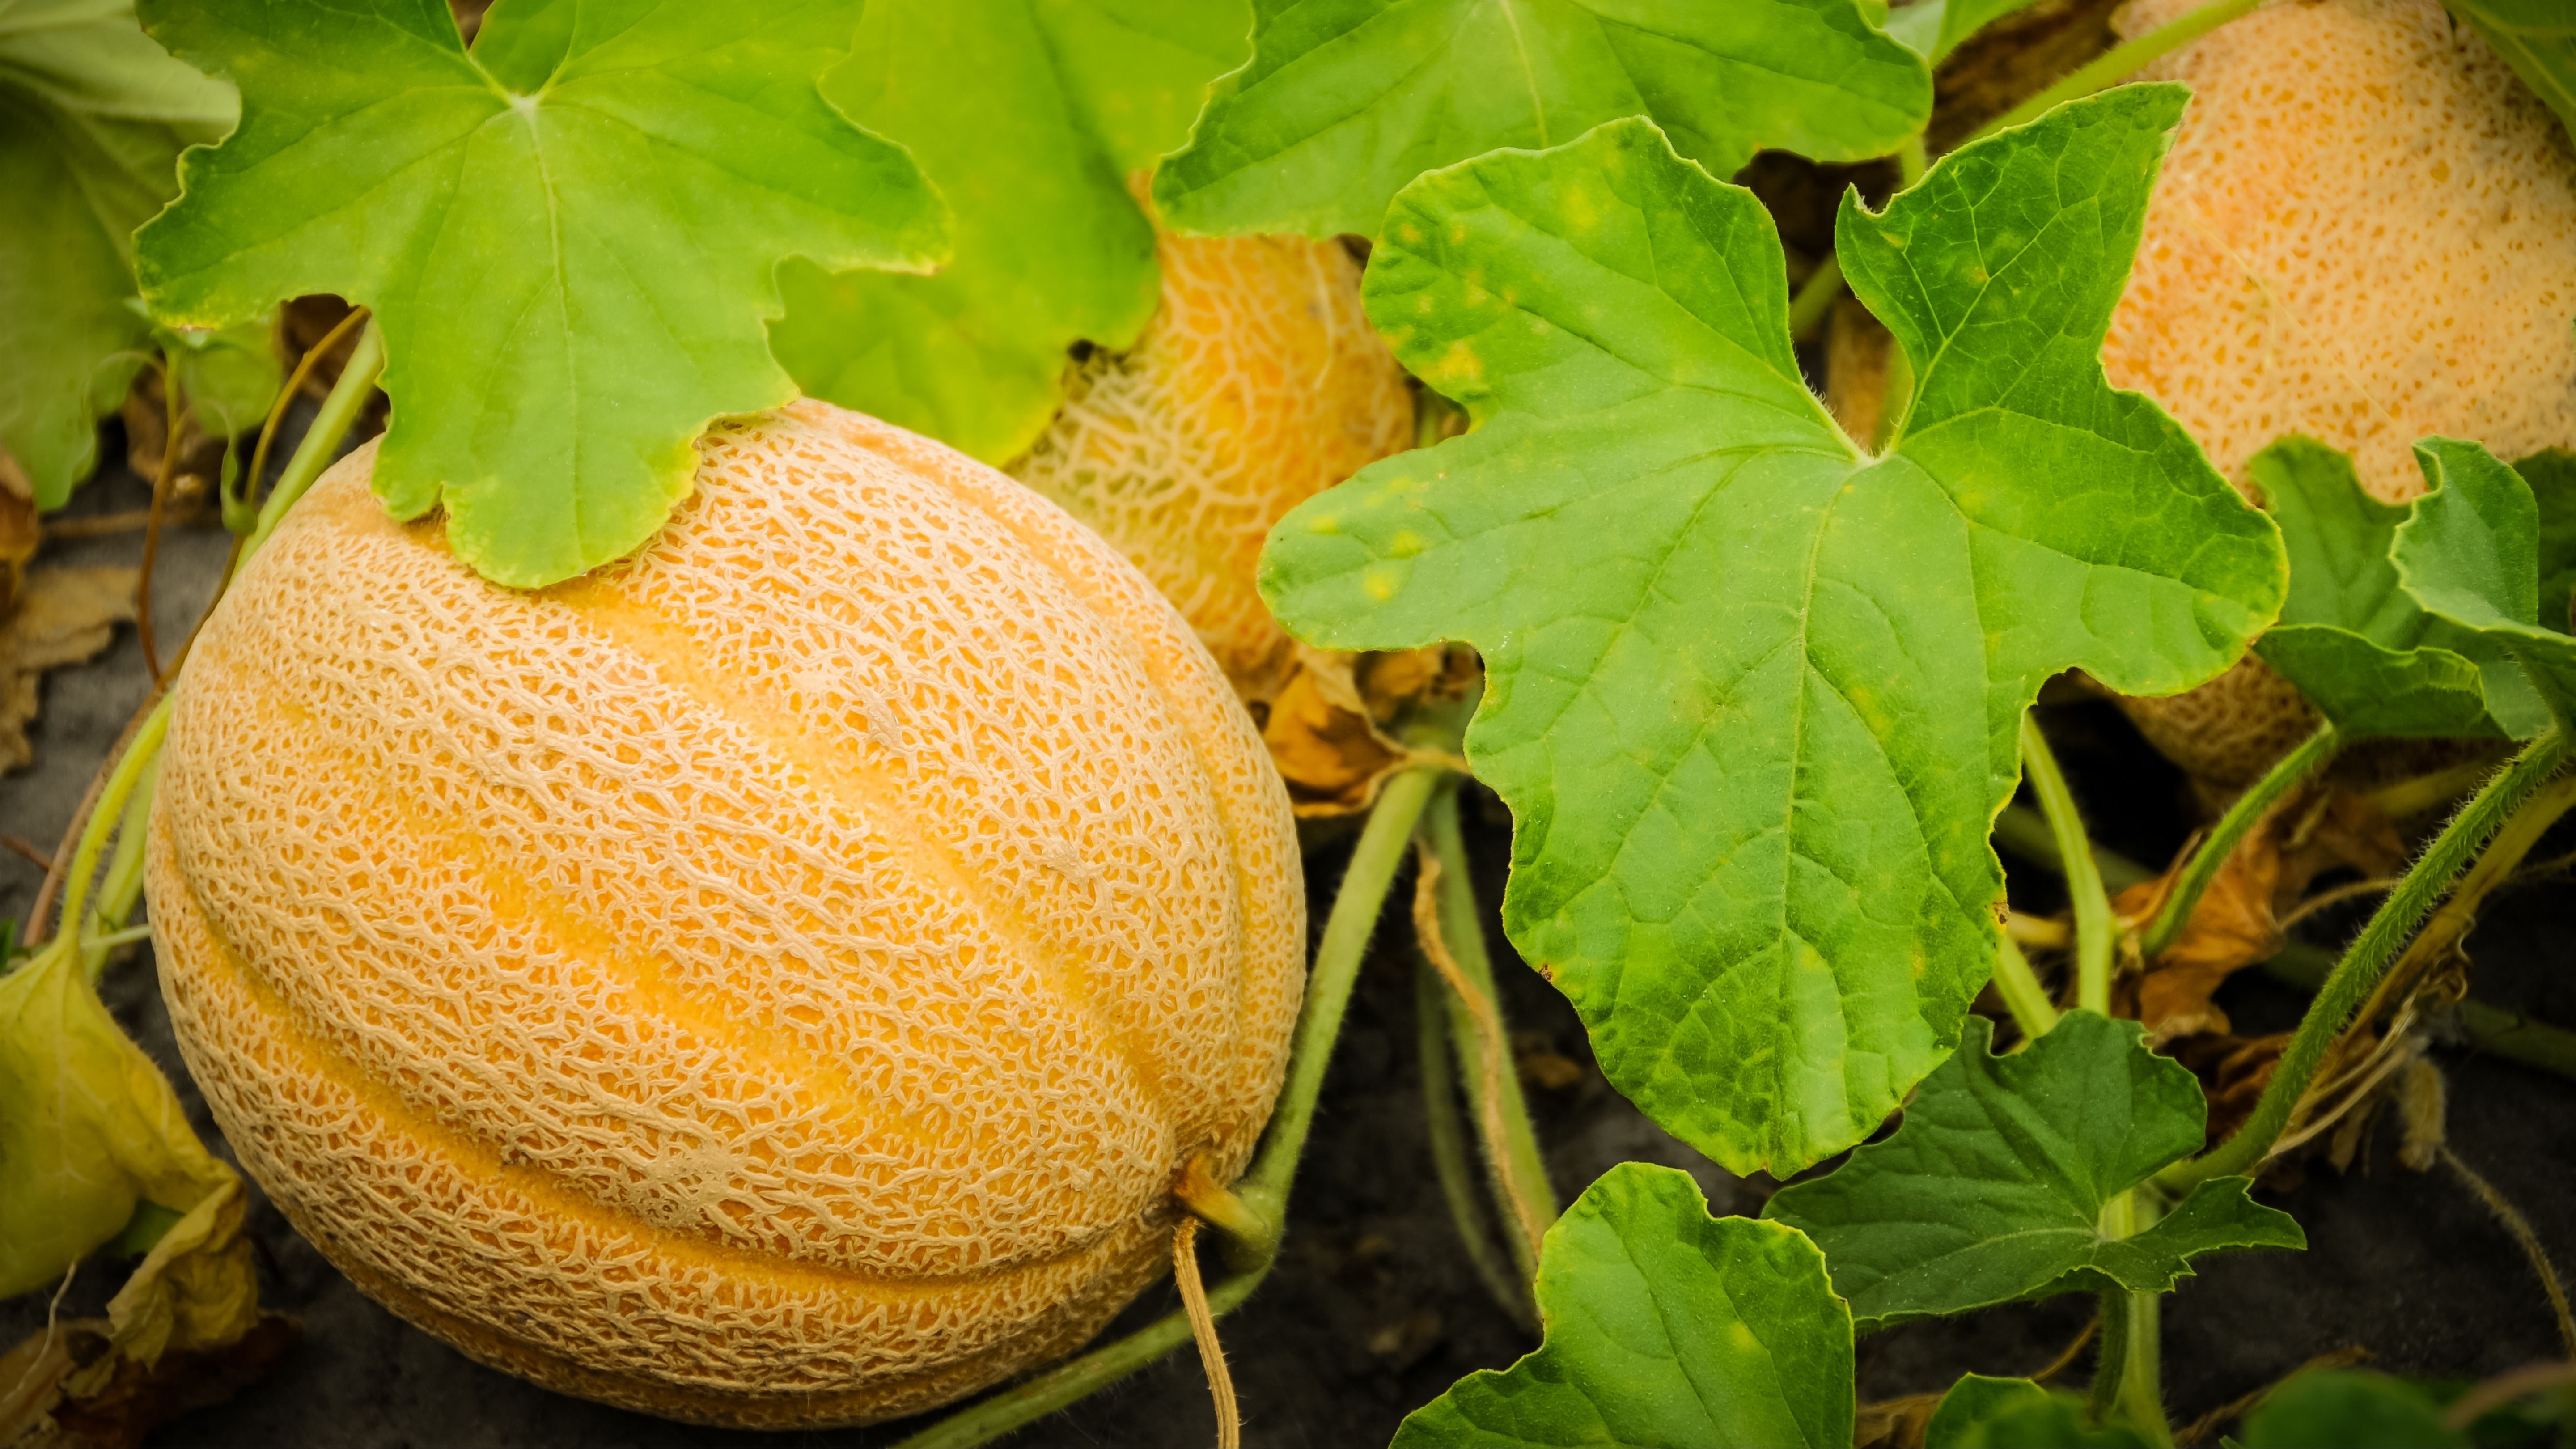 Overview of Cantaloupe Pests